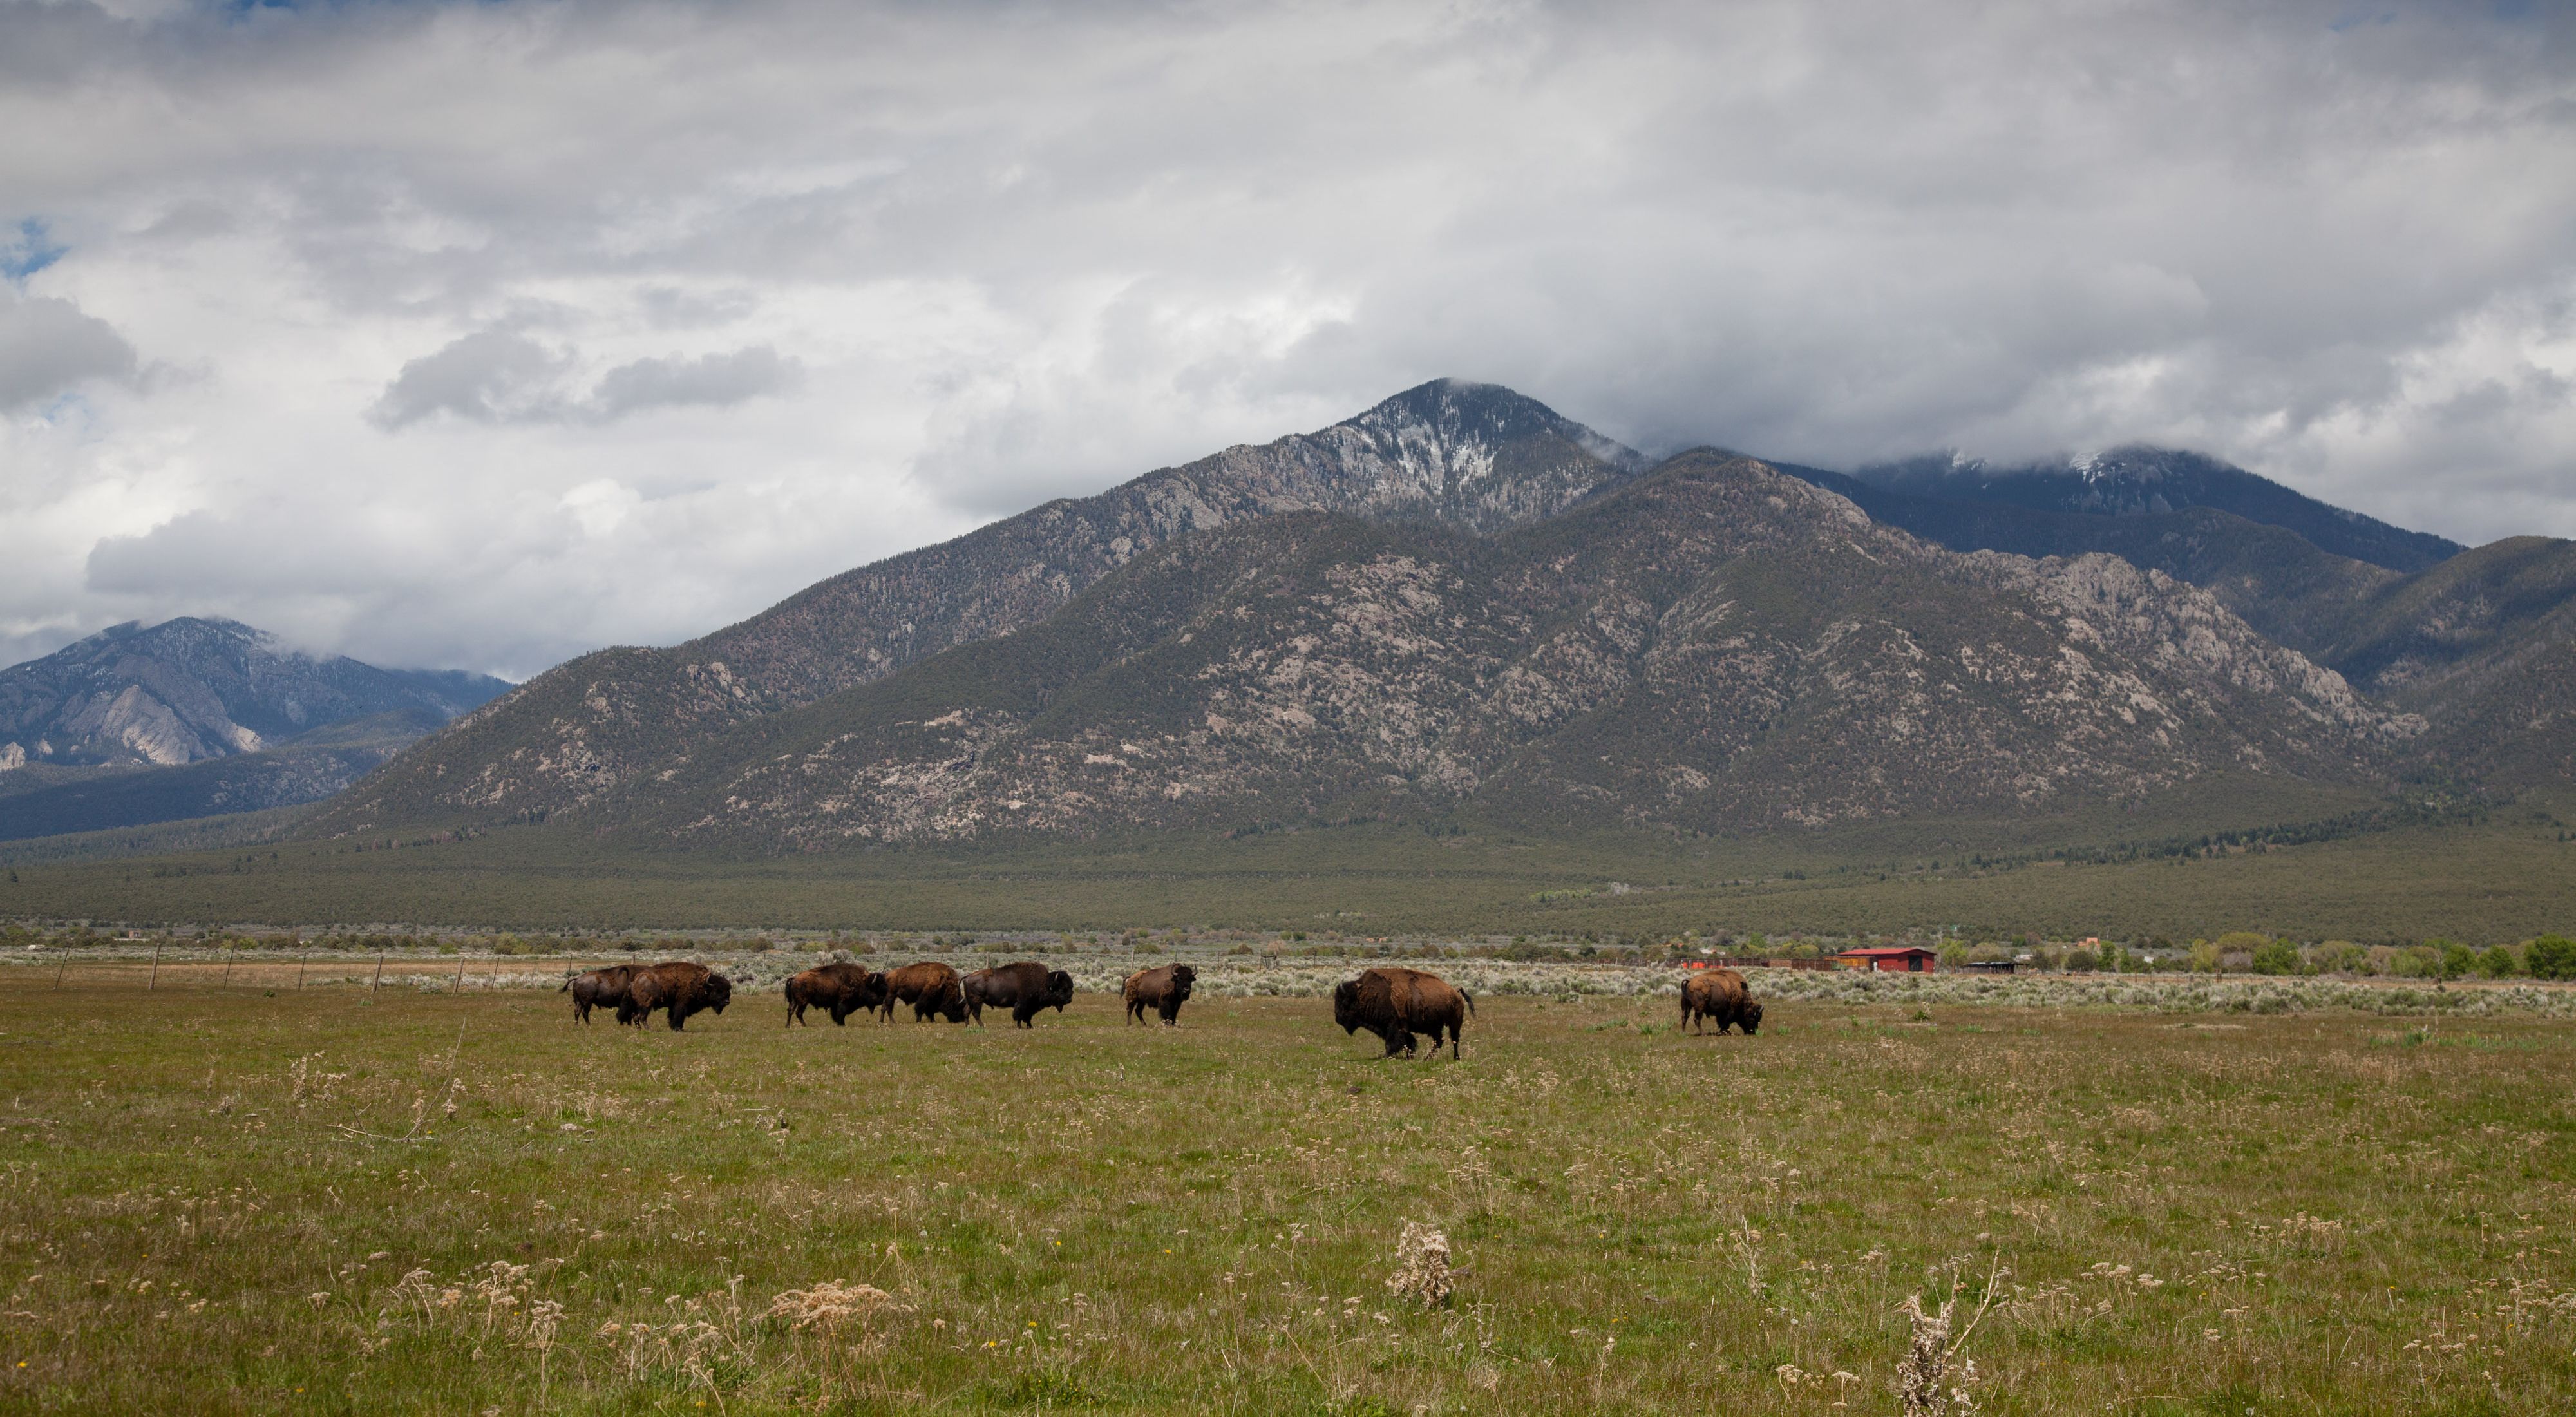 Bison roaming in New Mexico.